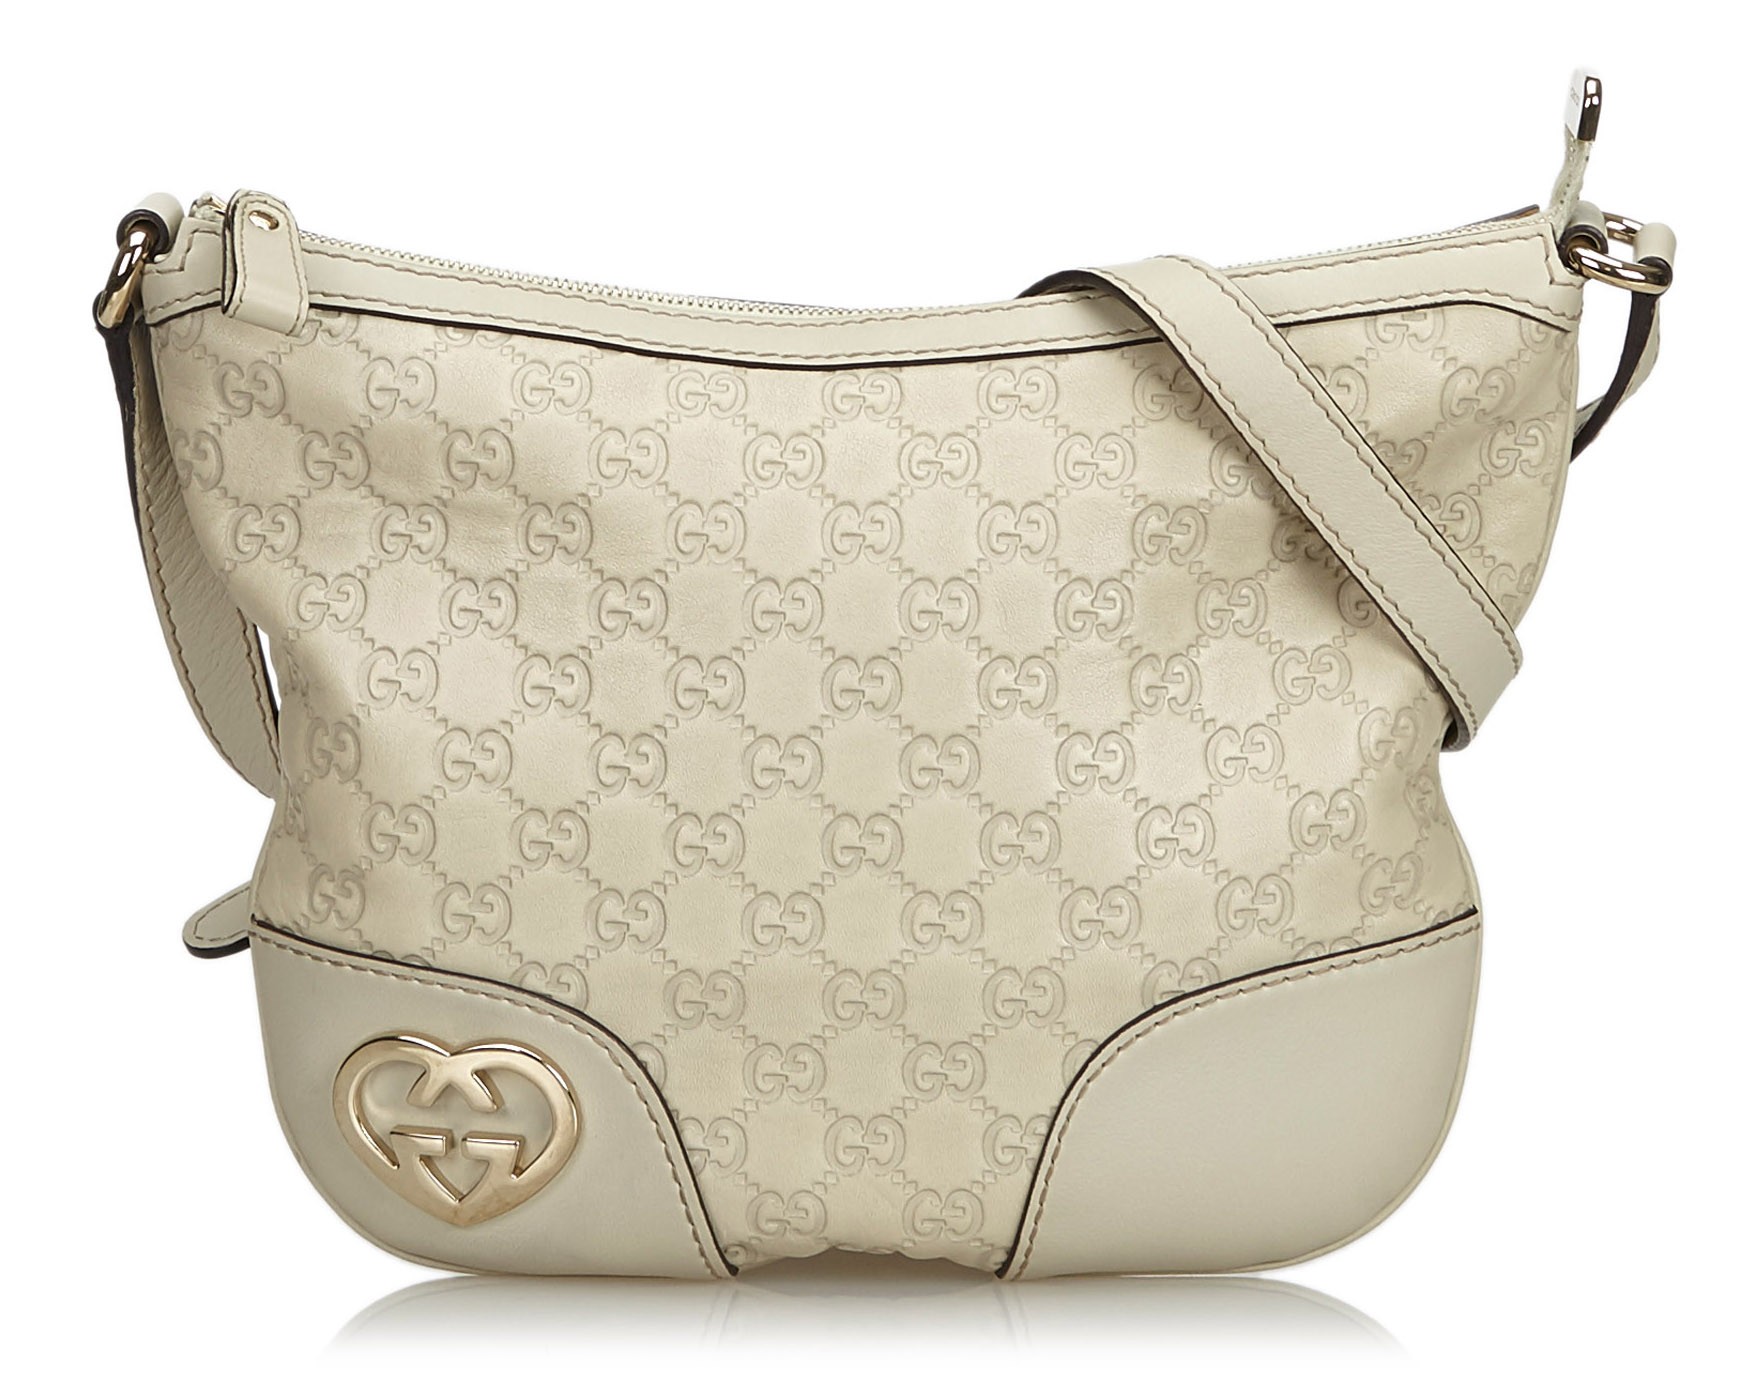 Easy to read over there Proud Gucci Vintage - Guccissima Lovely Crossbody Bag - White - Leather Handbag -  Luxury High Quality - Avvenice